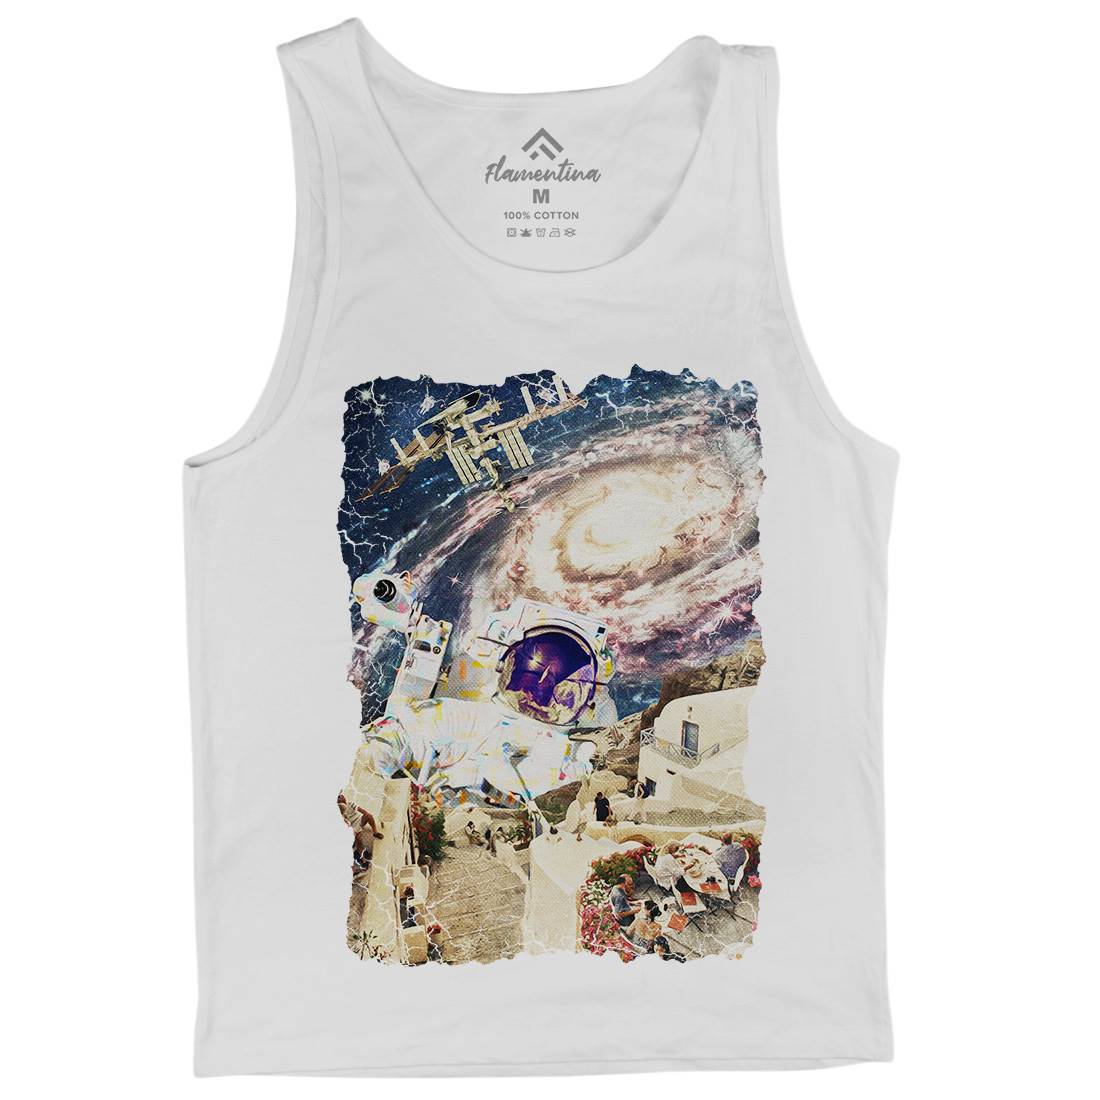 Stepped Out Mens Tank Top Vest Space A914